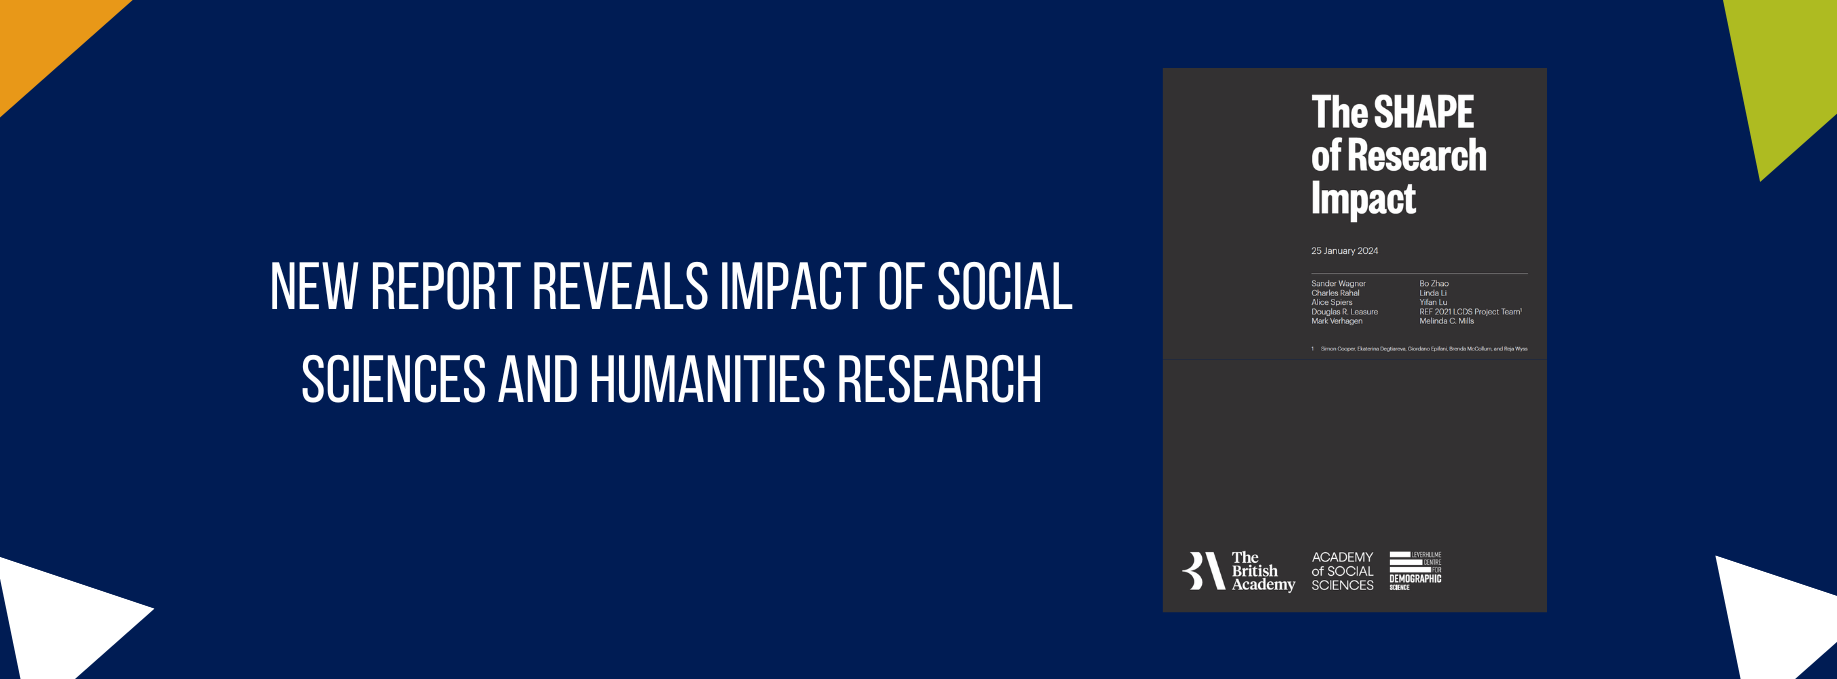 New report reveals impact of social sciences and humanities research